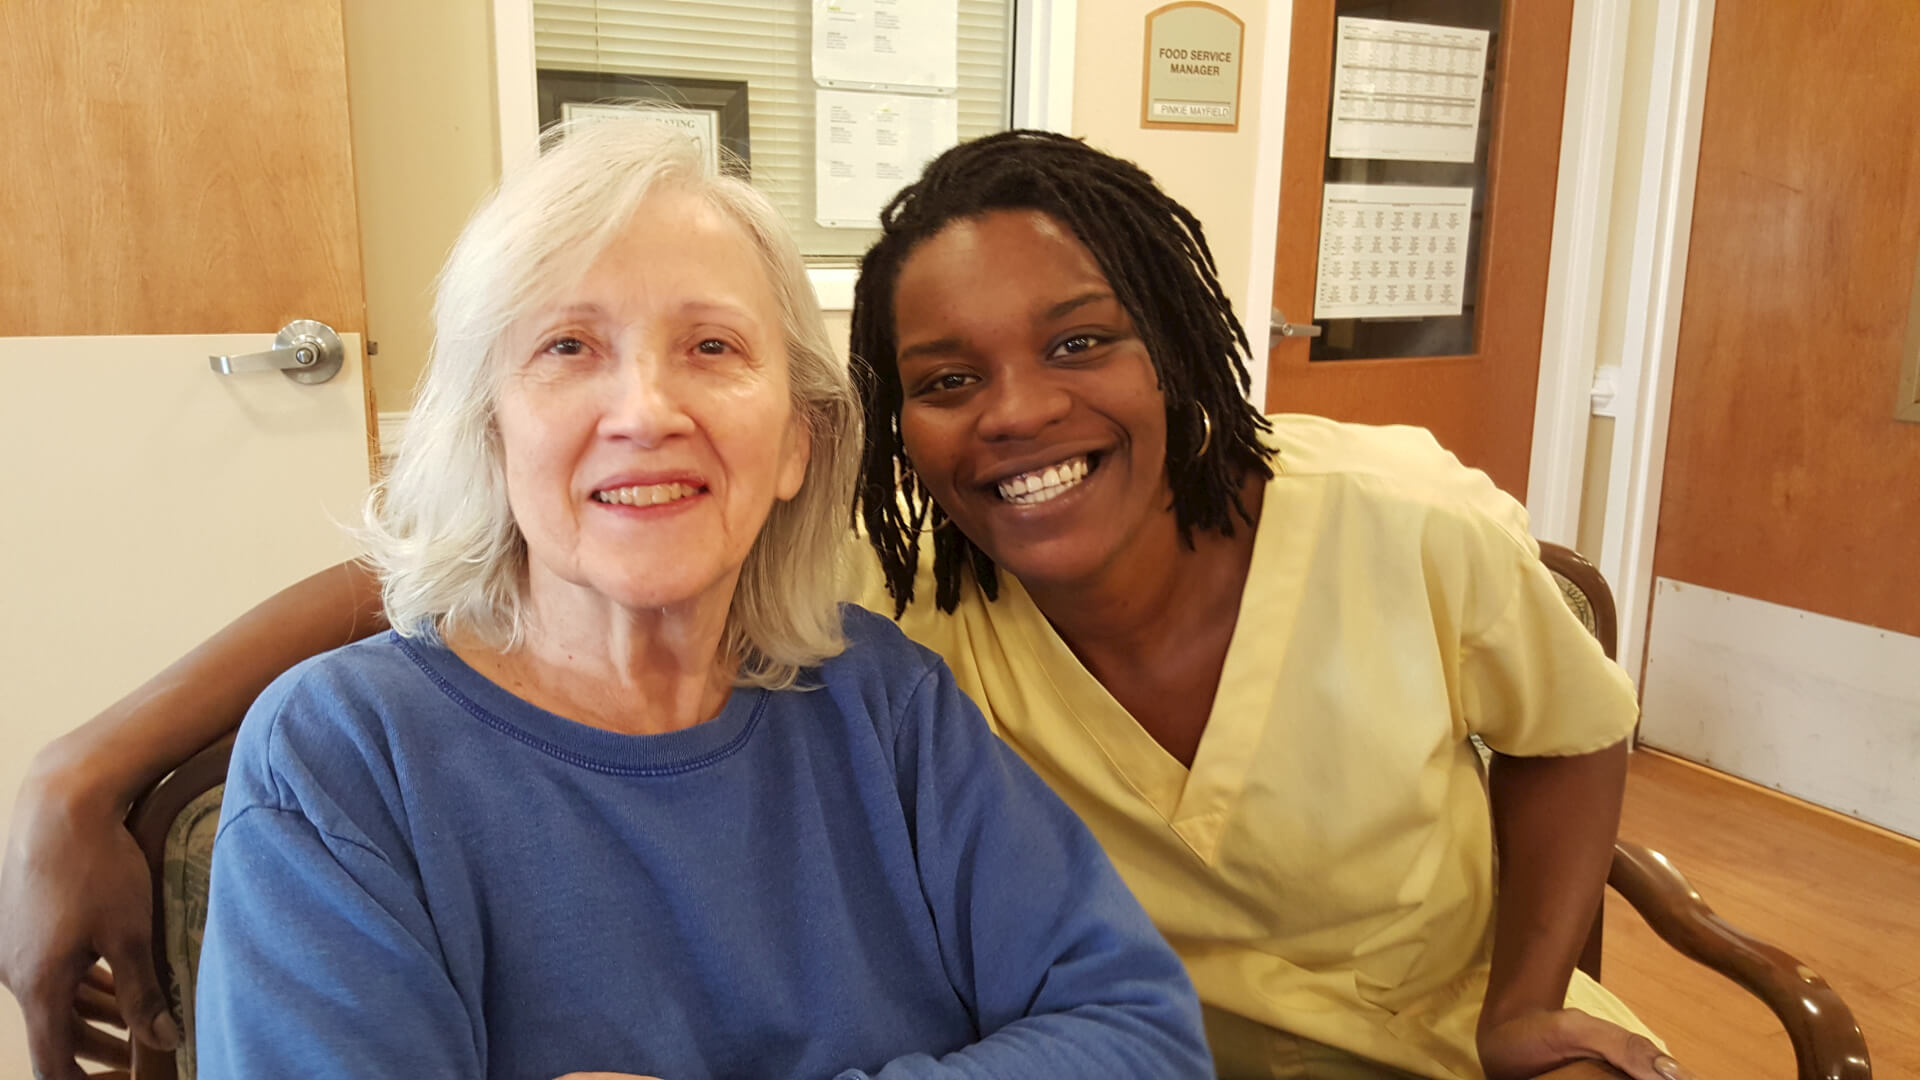  Hickory Village resident Arlene Clippard and Personal Care Assistant Ashley Chislom